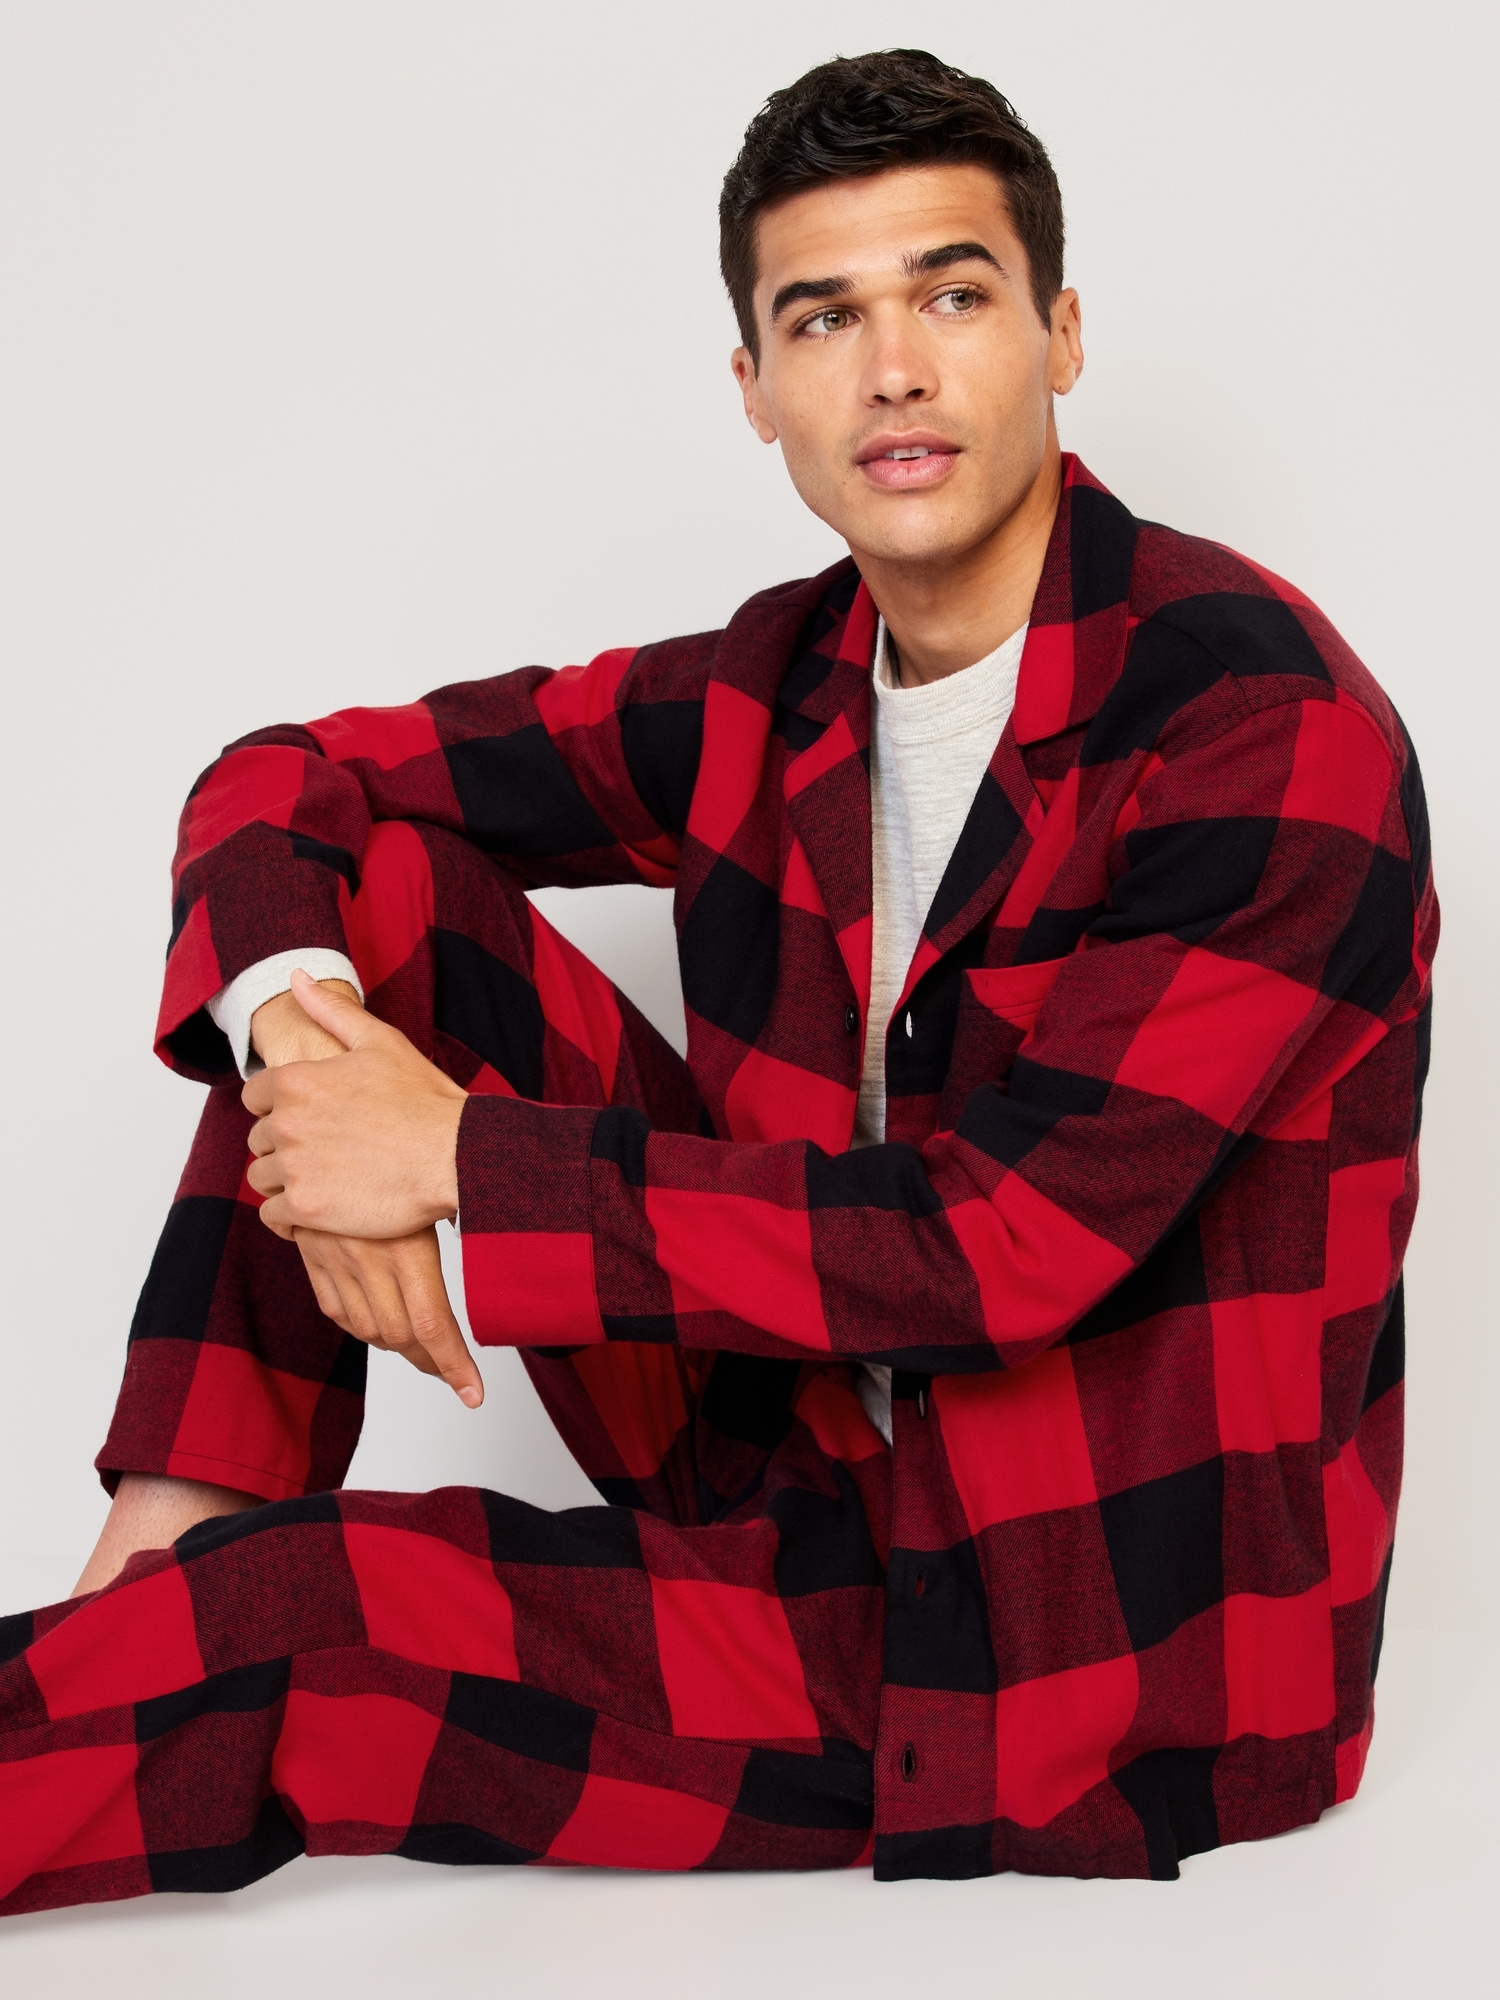 NWT: Men's Old Navy Plaid Flannel Pajama Pants, Red/Black, Size XL